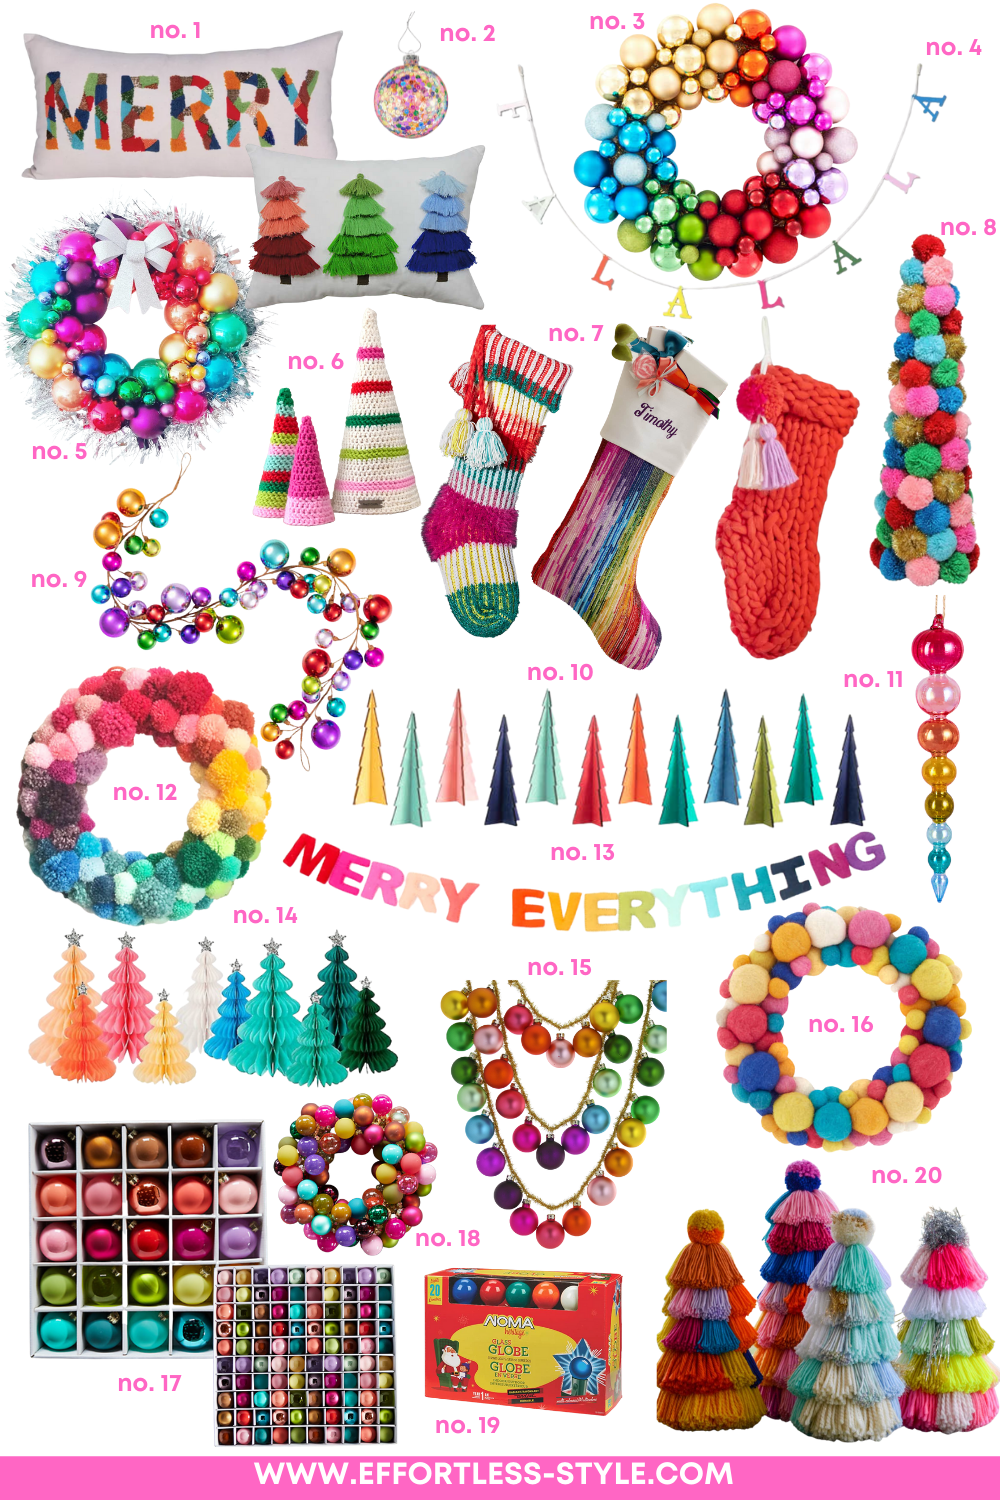 A-ROUND-UP-OF-COLORFUL-CHRISTMAS-DECORATIONS